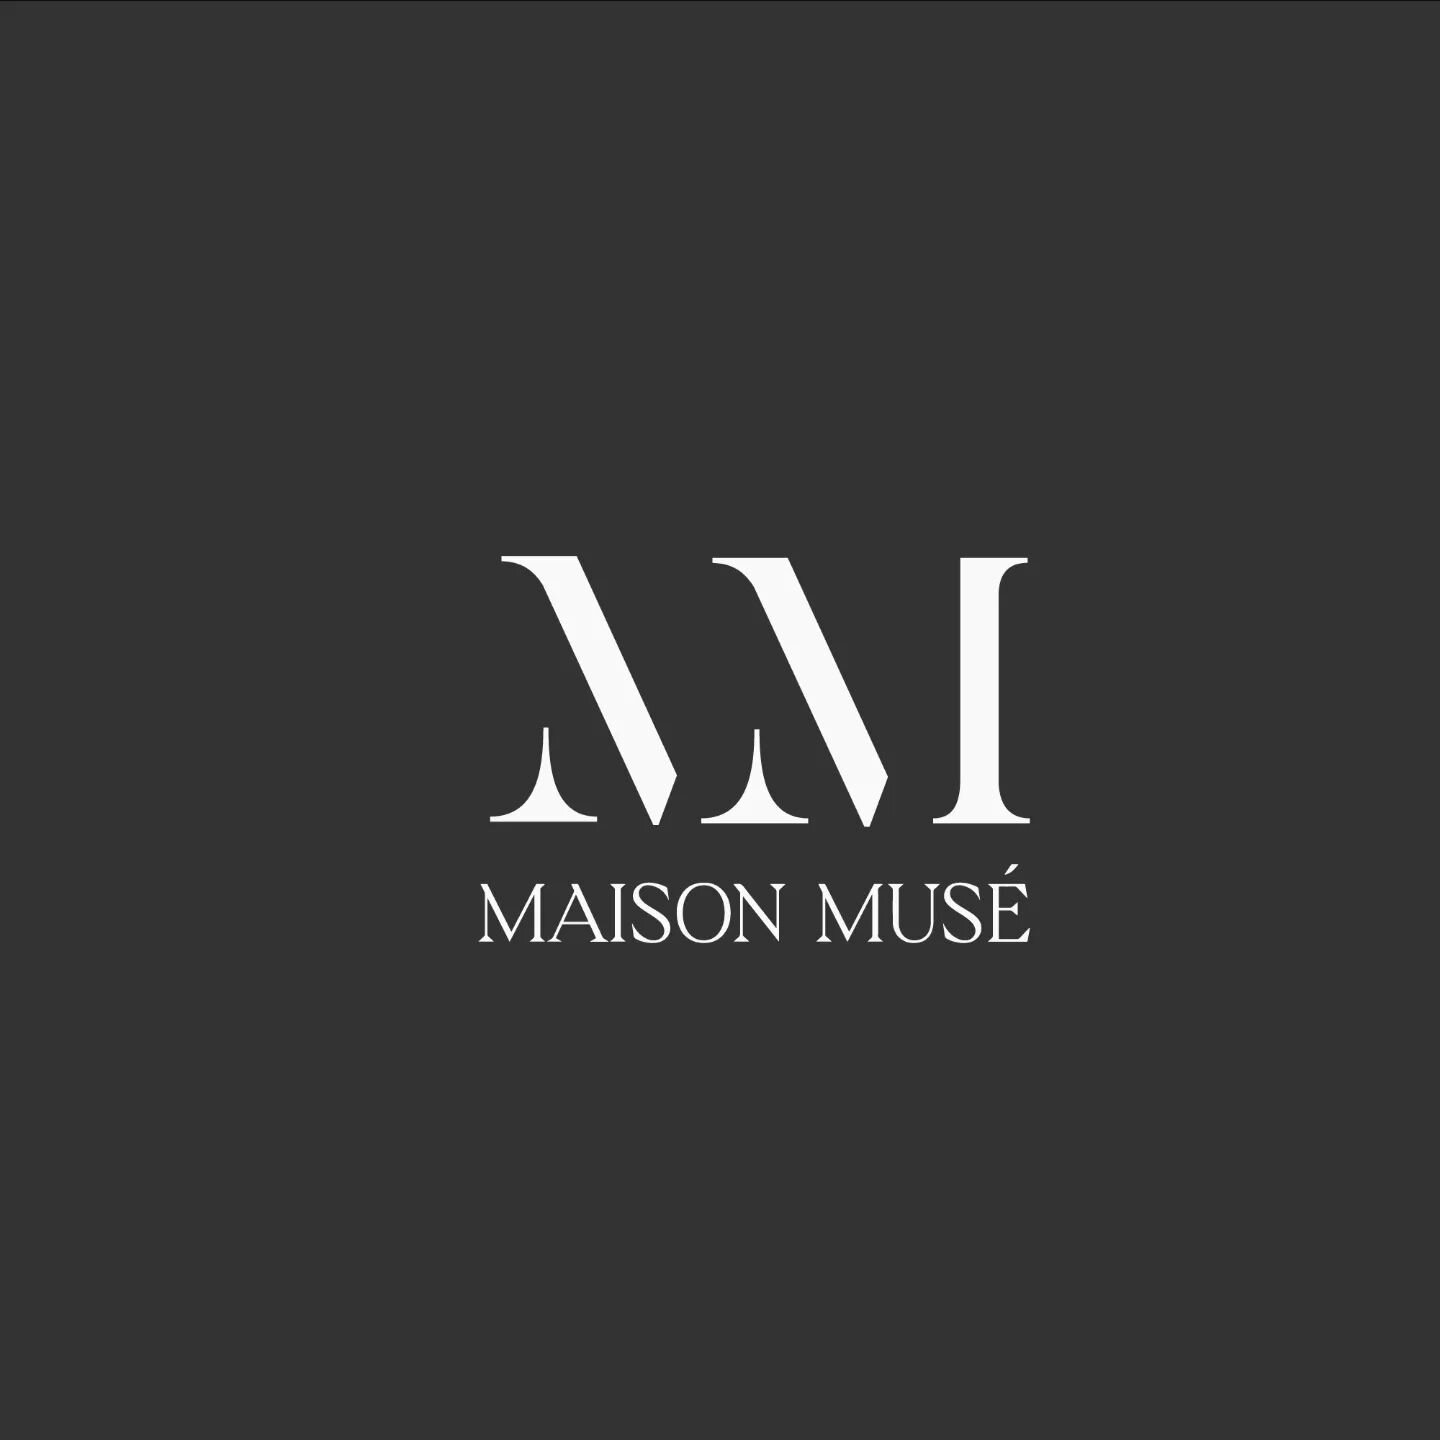 MAISON MUS&Eacute; {@maisonmuse_official} | Brand Development, Naming &amp; Identity Design

A Maison Mus&eacute; woman looks effortless yet striking, eye-catching, and full of confidence. She is a woman with her own vision of beauty and femininity d